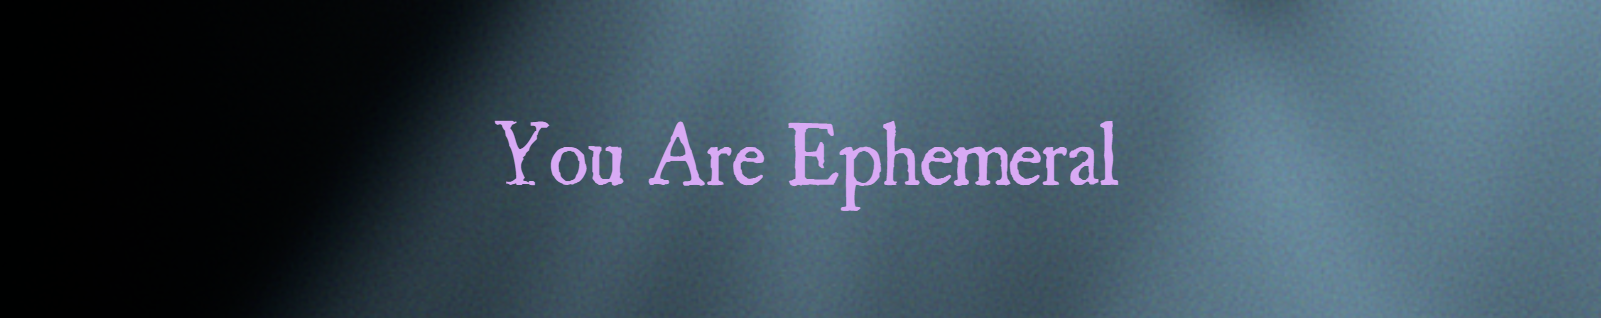 You Are Ephemeral